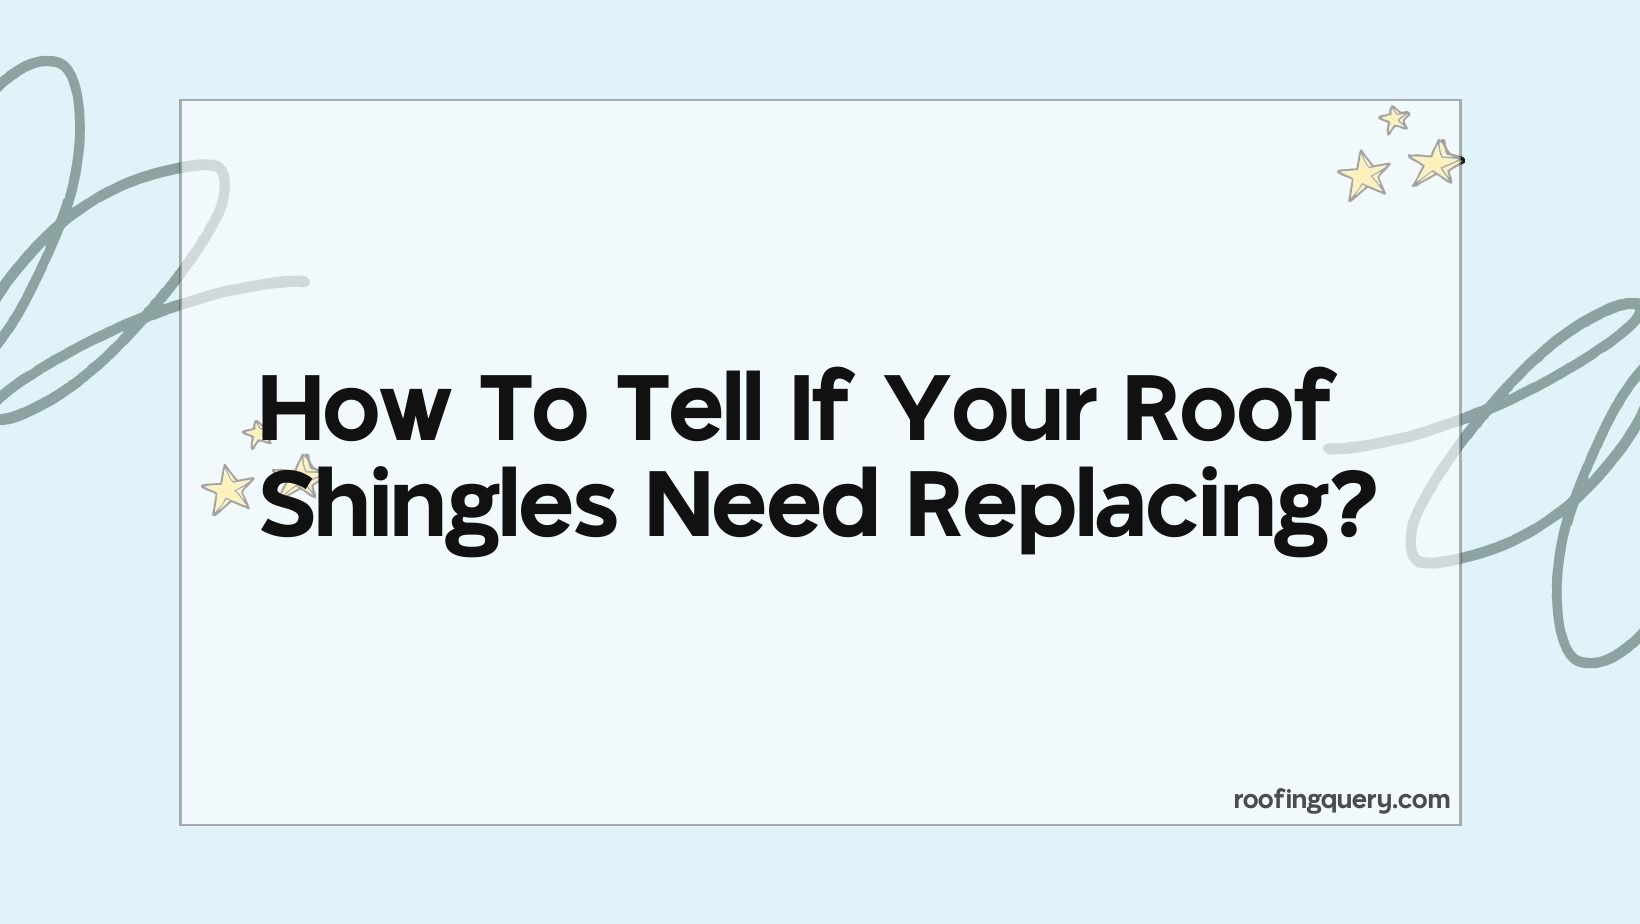 How To Tell If Your Roof Shingles Need Replacing